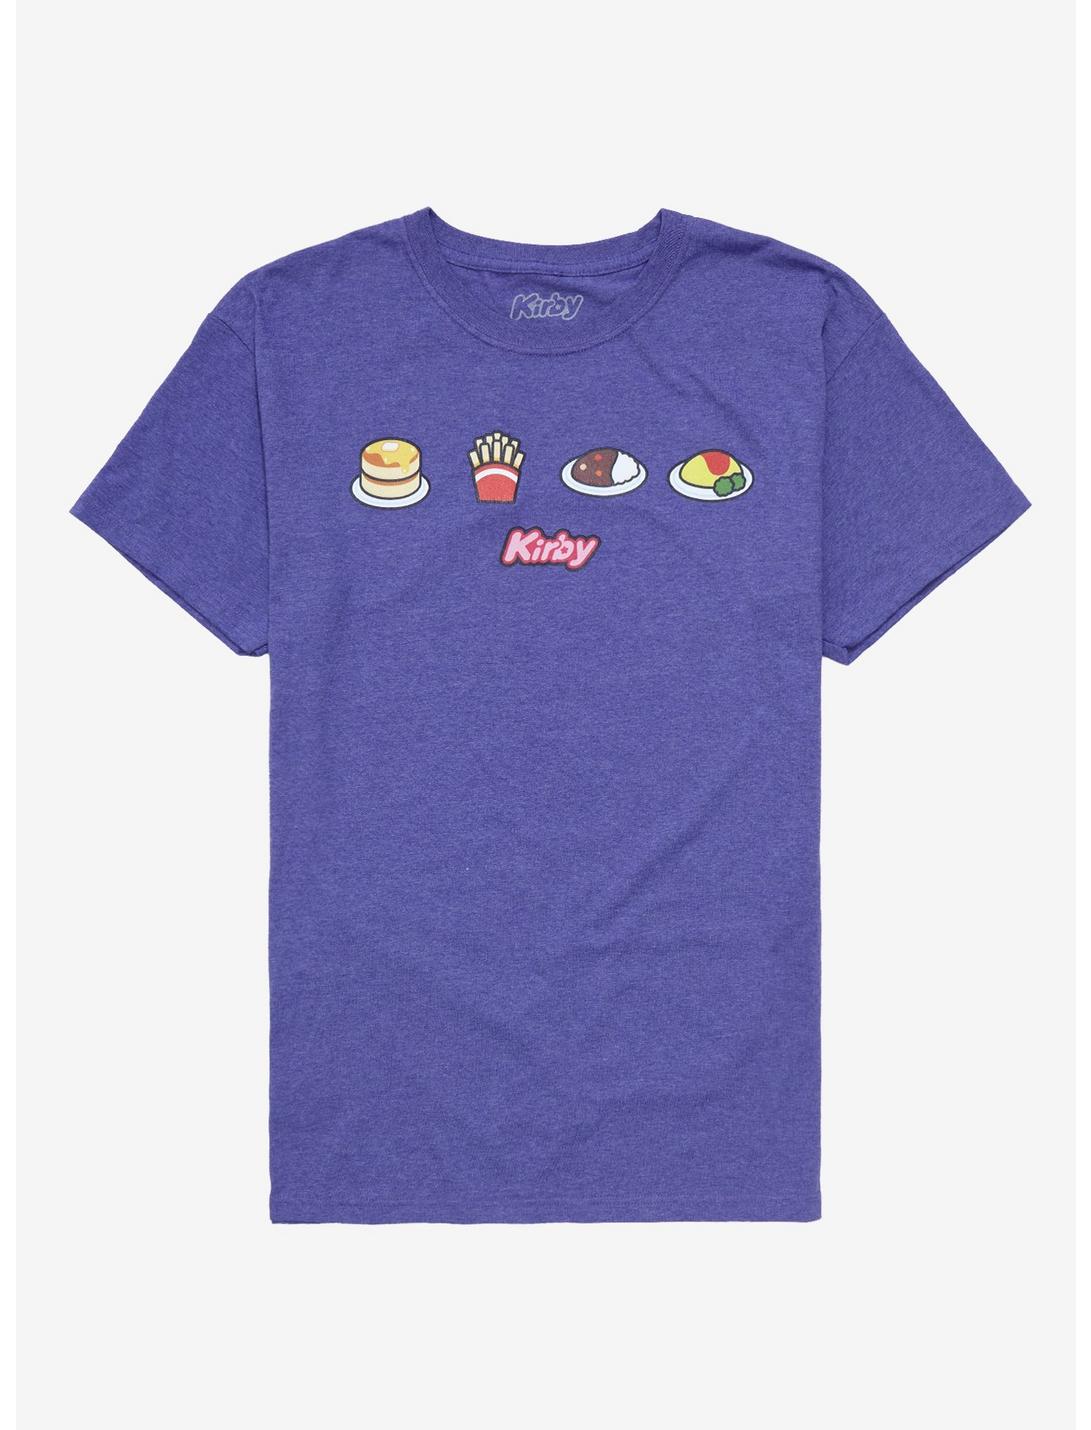 Kirby Eating & Sleeping Double-Sided T-Shirt, PURPLE, hi-res